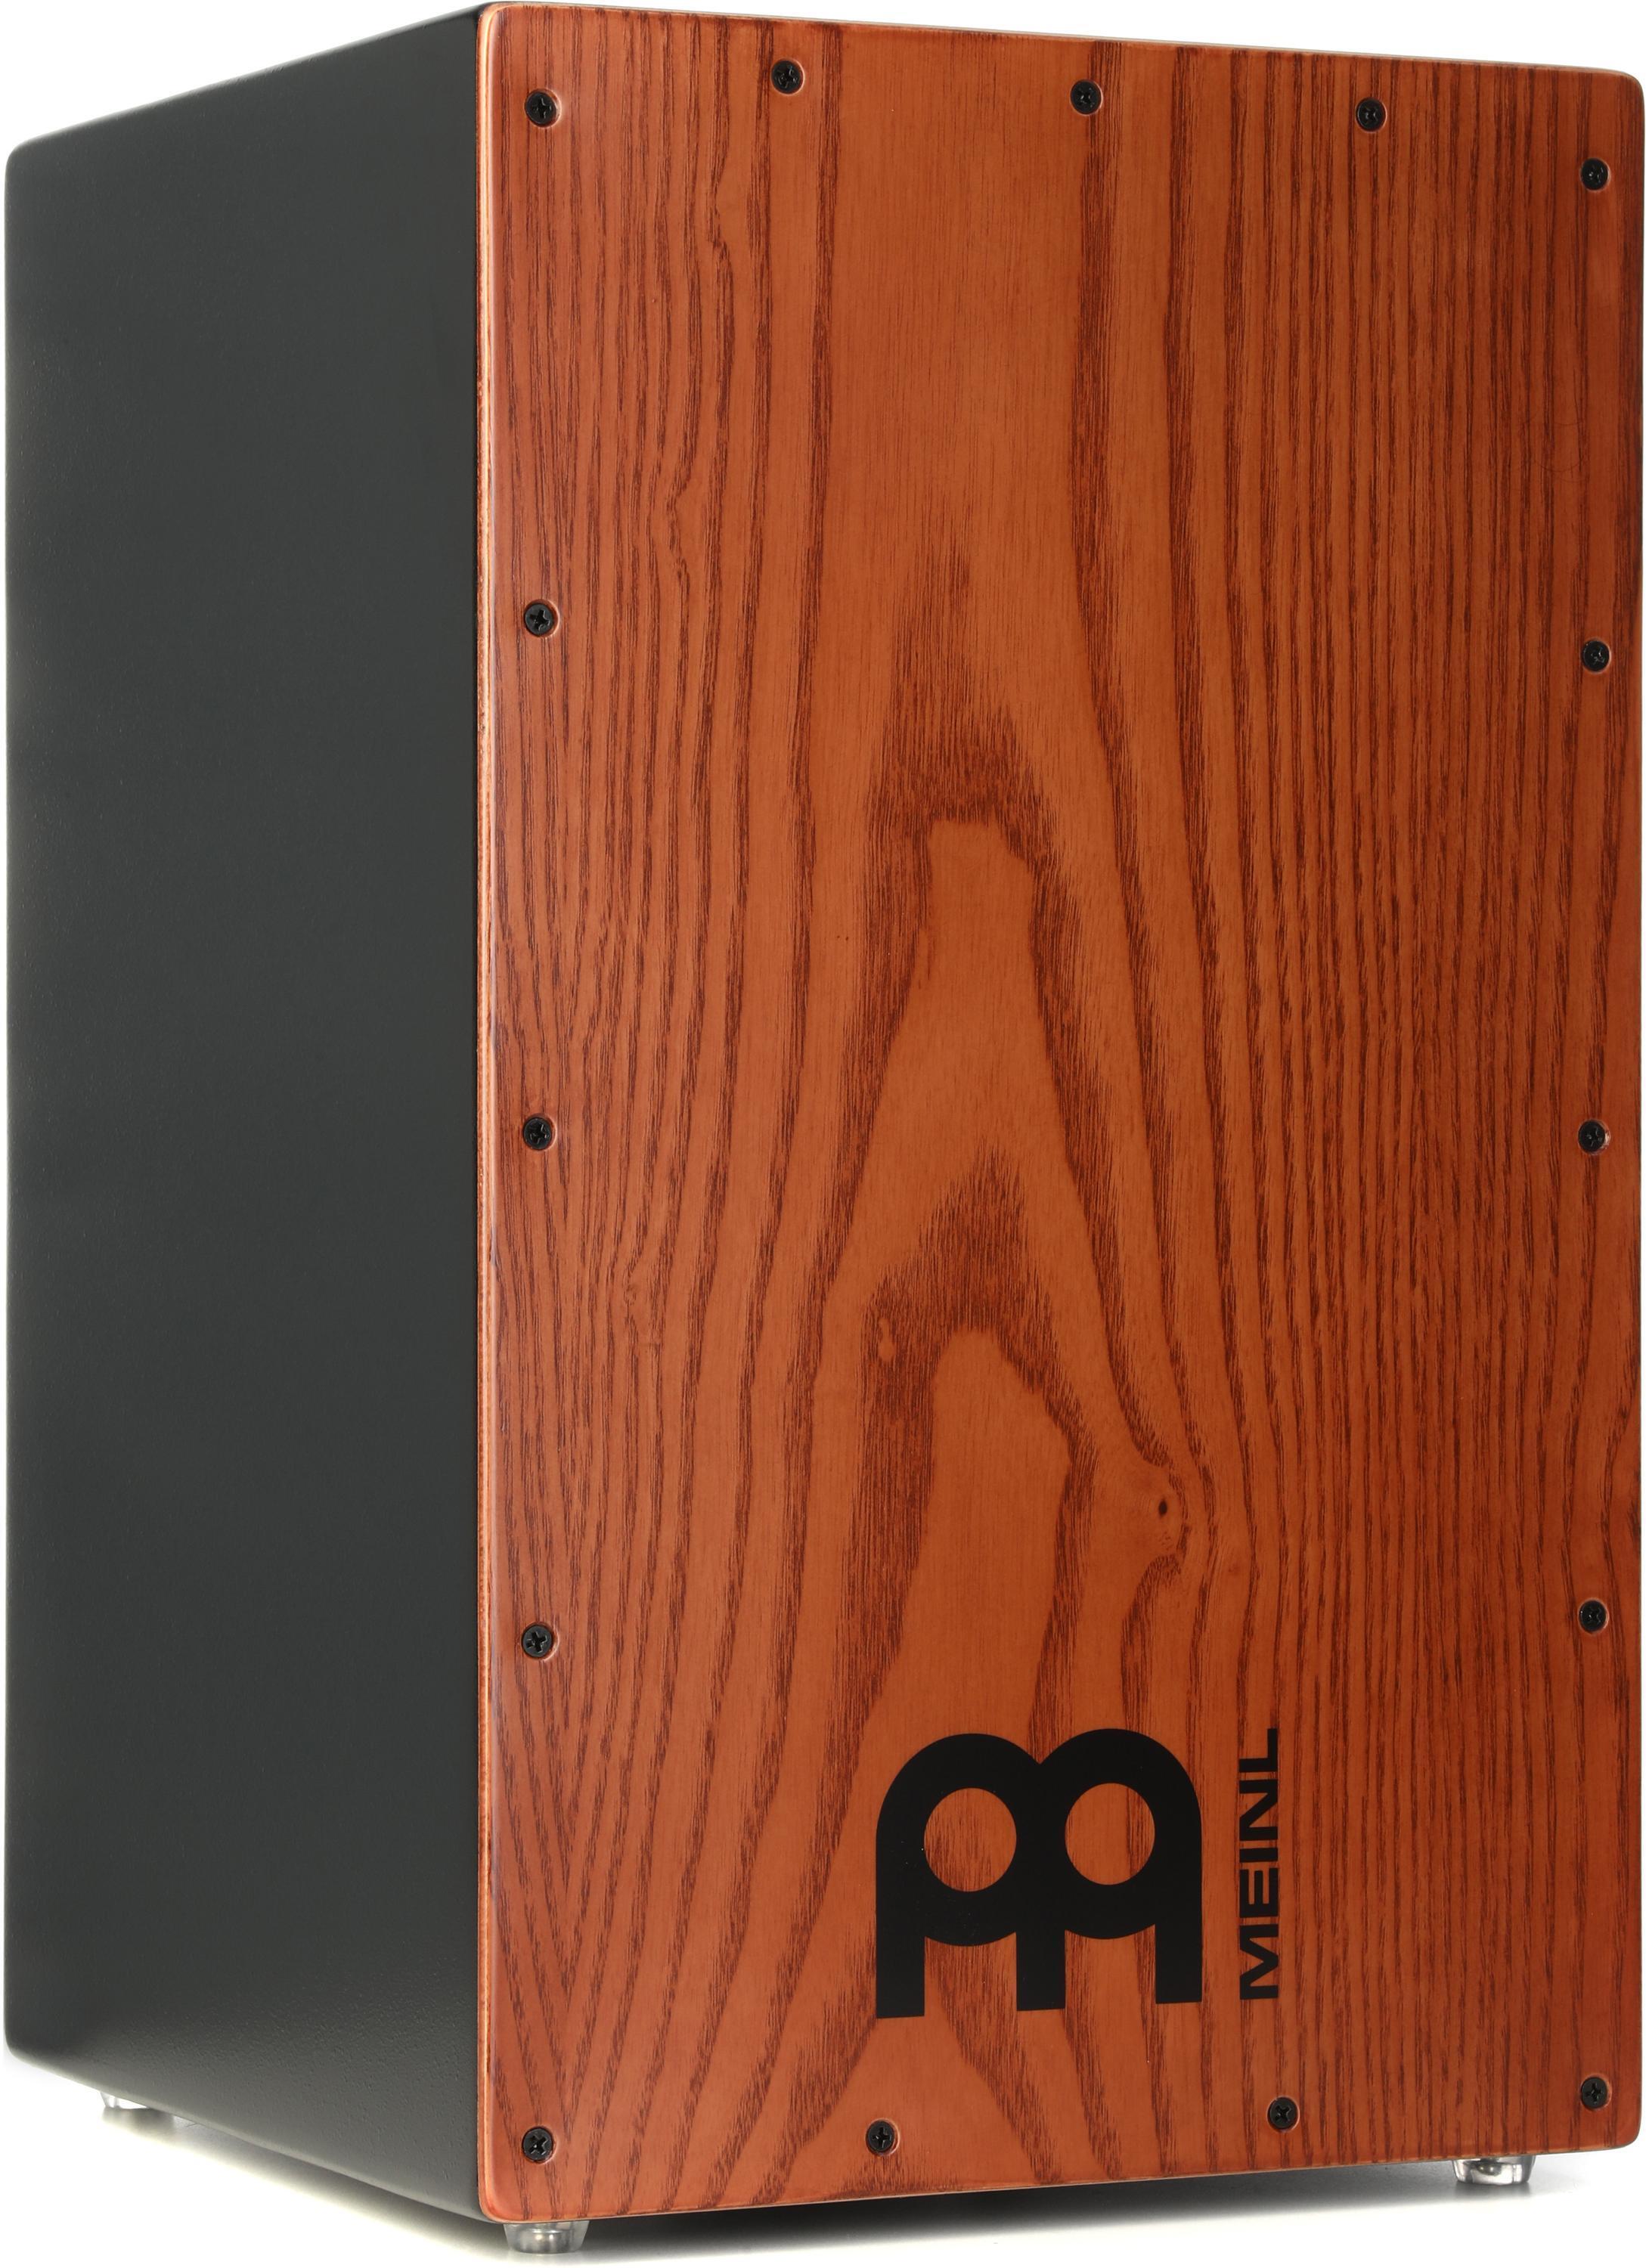 Meinl Percussion Headliner Series String Cajon - Stained American